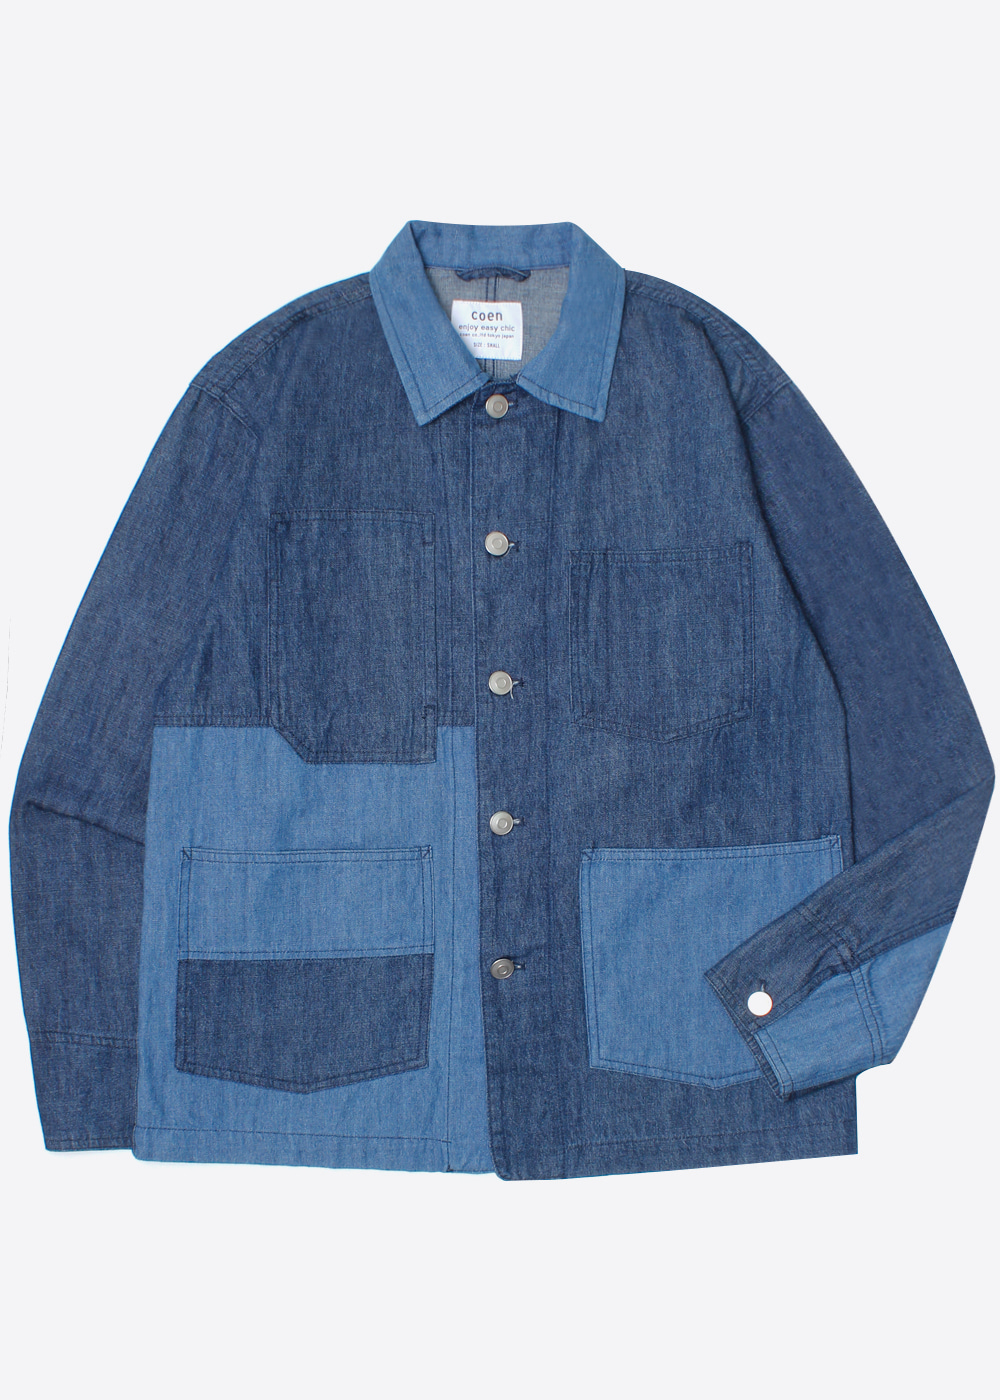 COEN BY UNITED ARROWS’over fit’ denim patchwork jacket